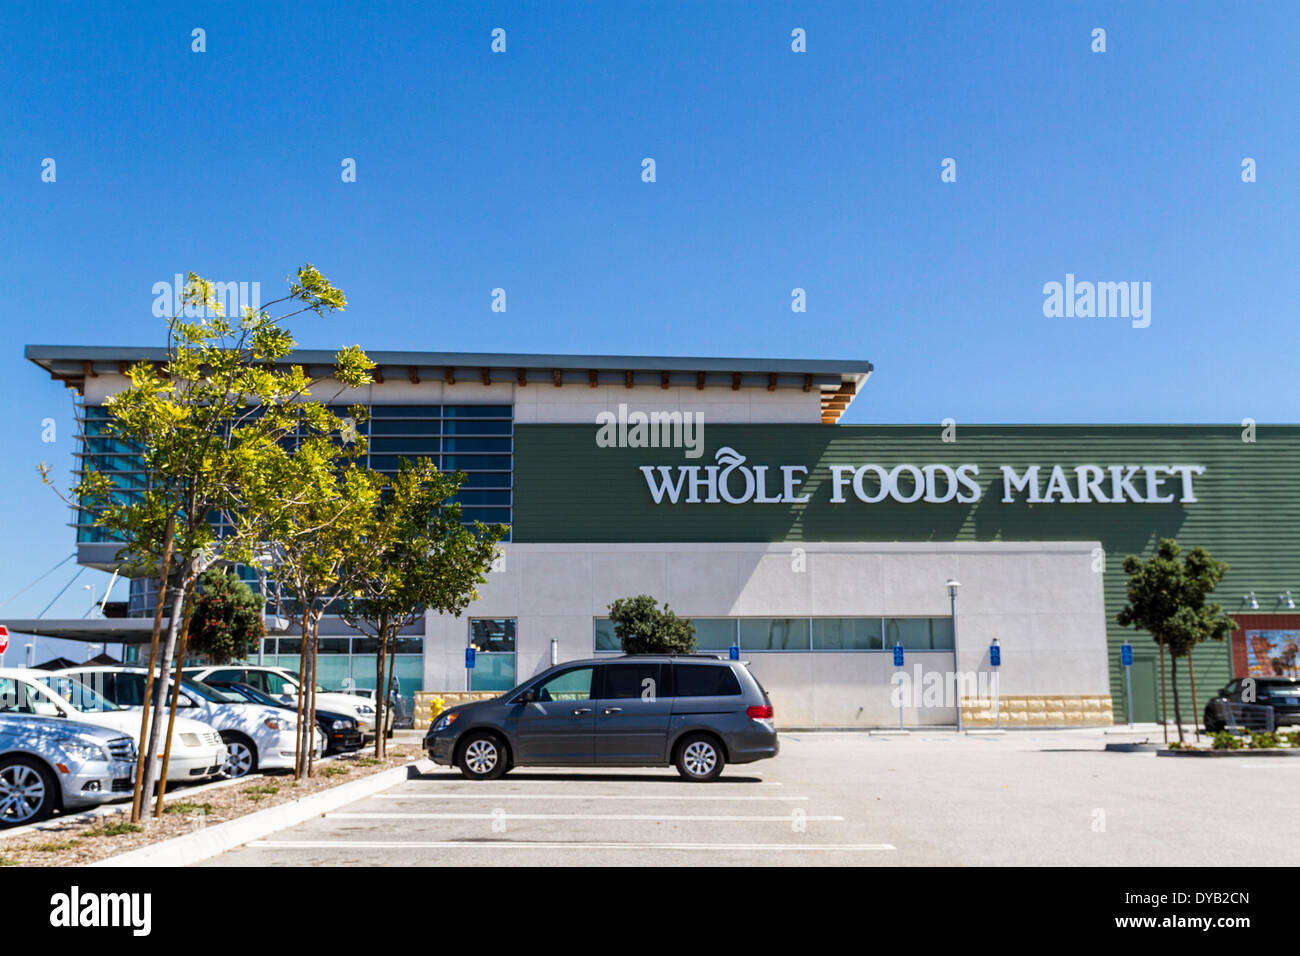 The Whole Foods Market in Oxnard California at the open air shopping mall called The Collection Stock Photo